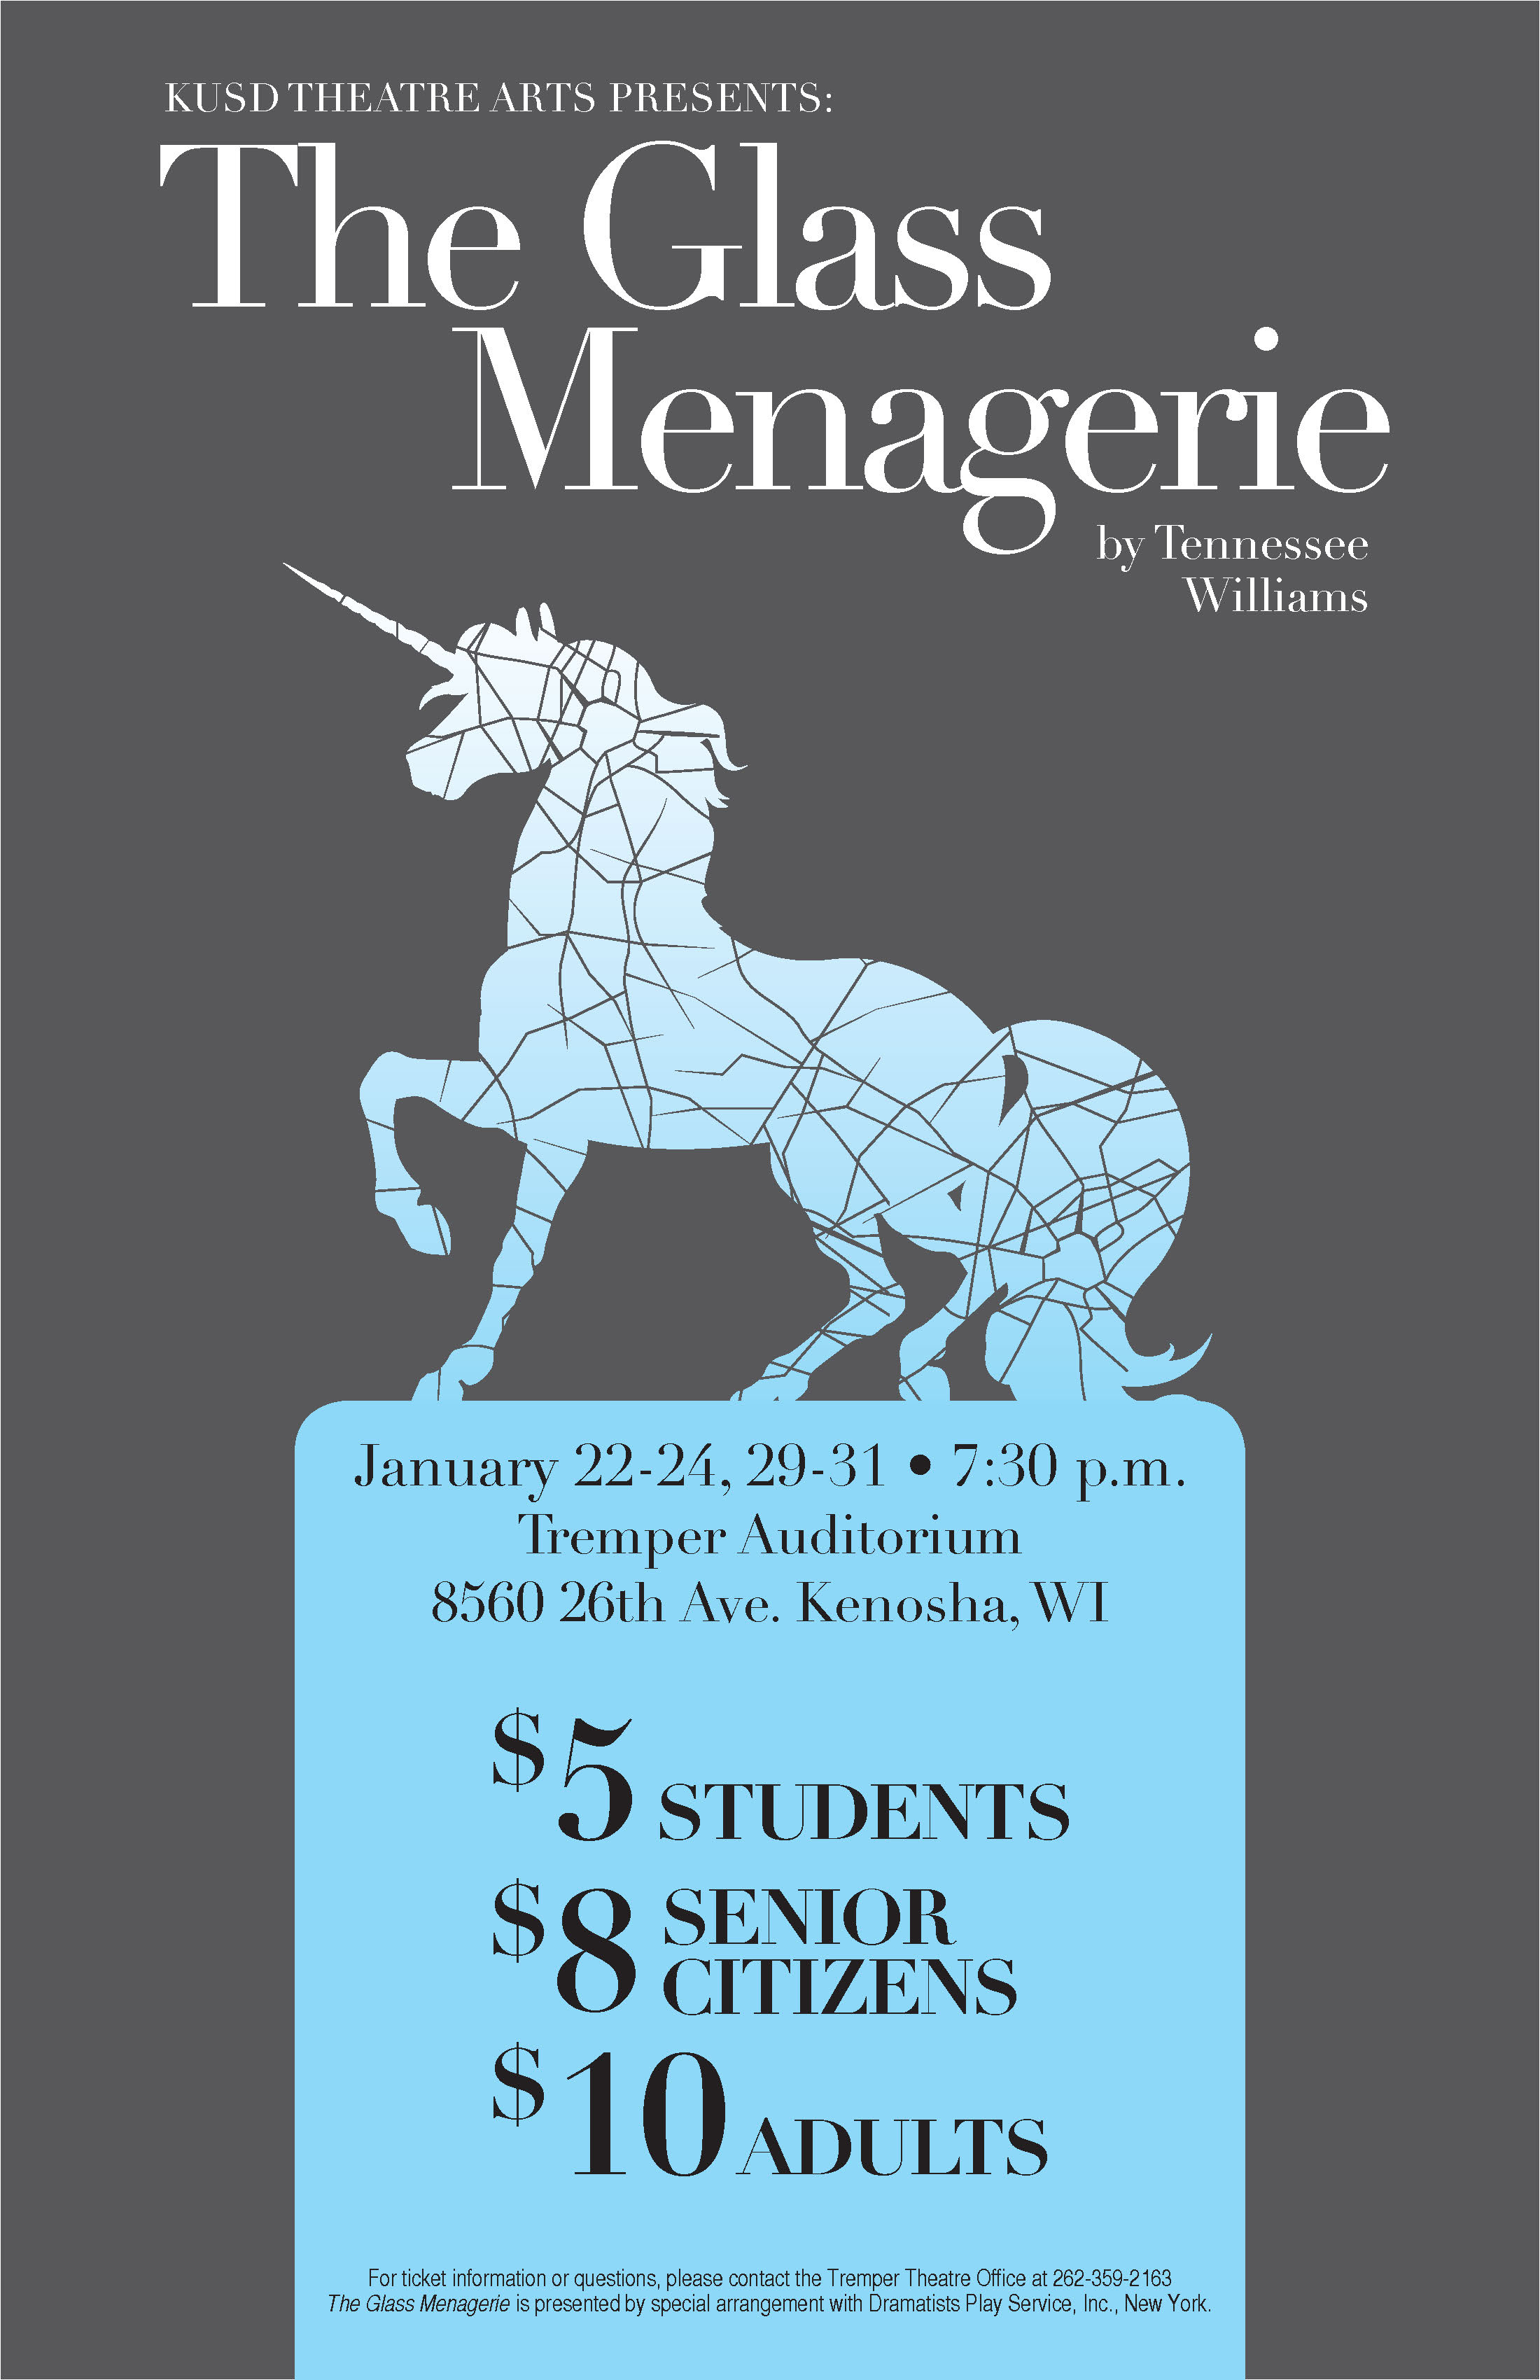 The poster for The Glass Menagerie